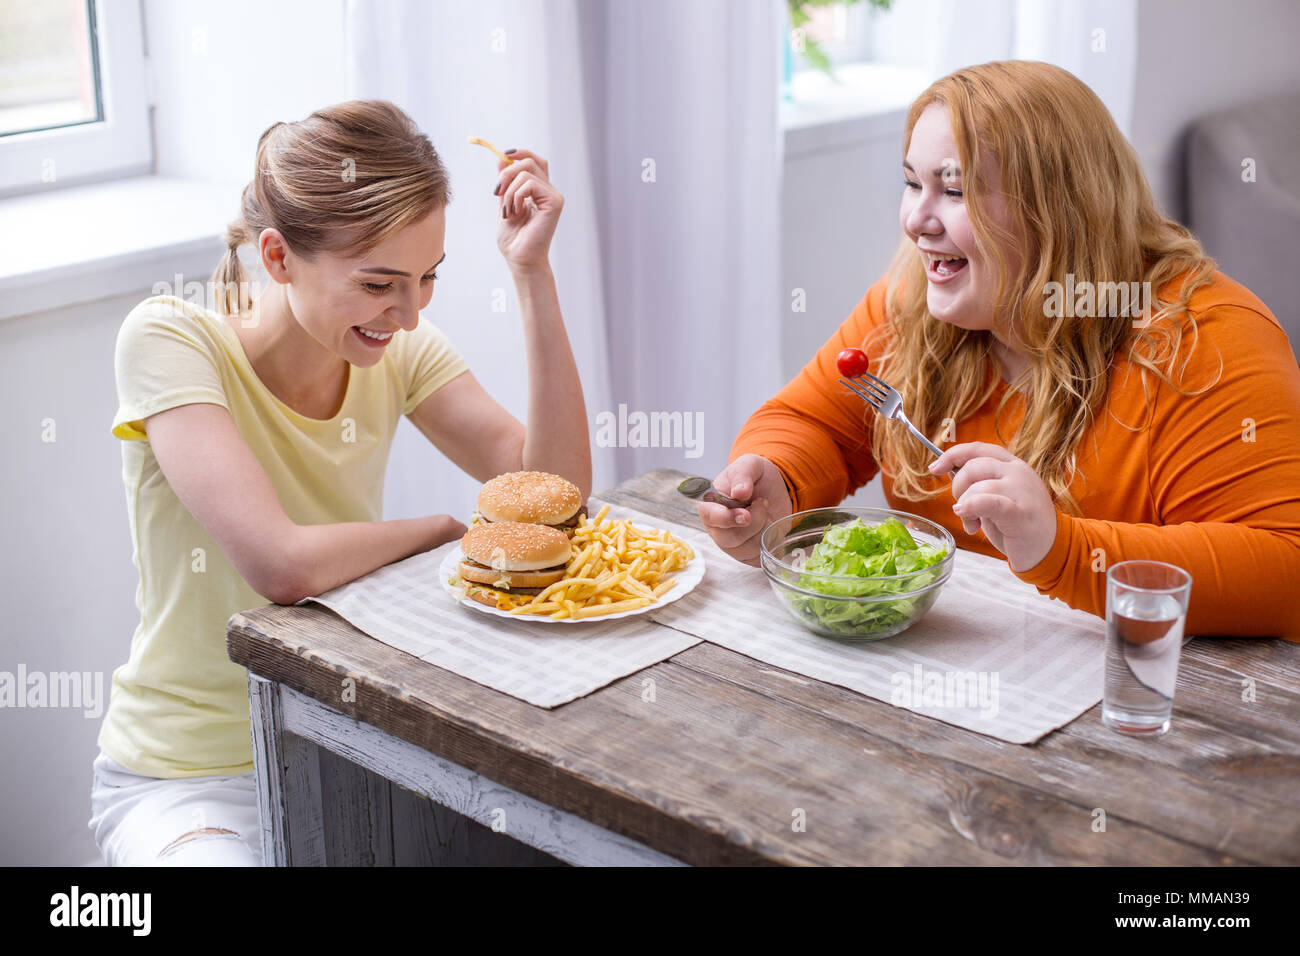 Smiling slim woman having lunch with her friend Stock Photo